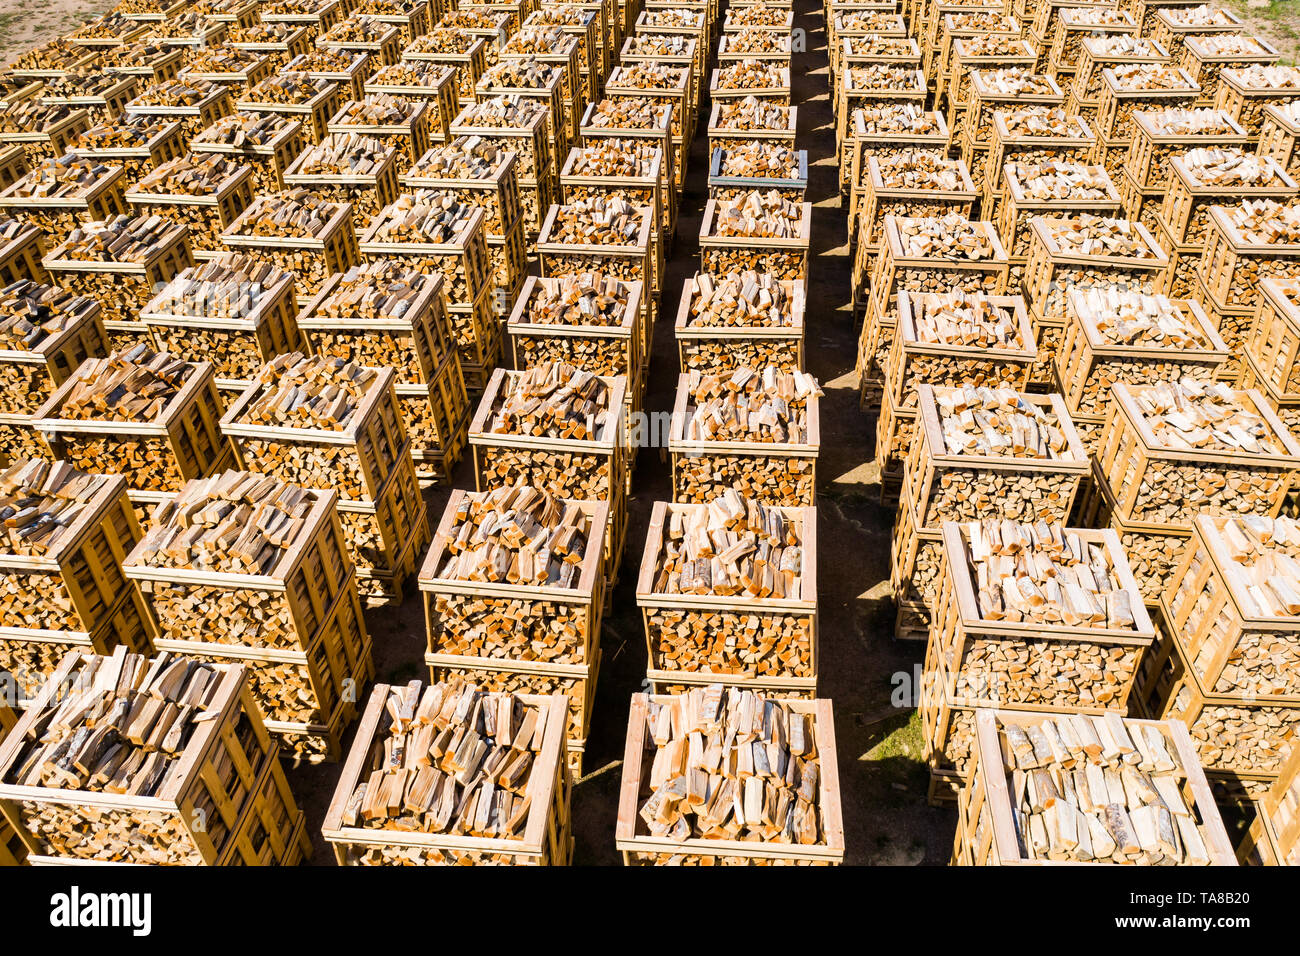 Rows of firewood stacked on pallets seen from above Stock Photo